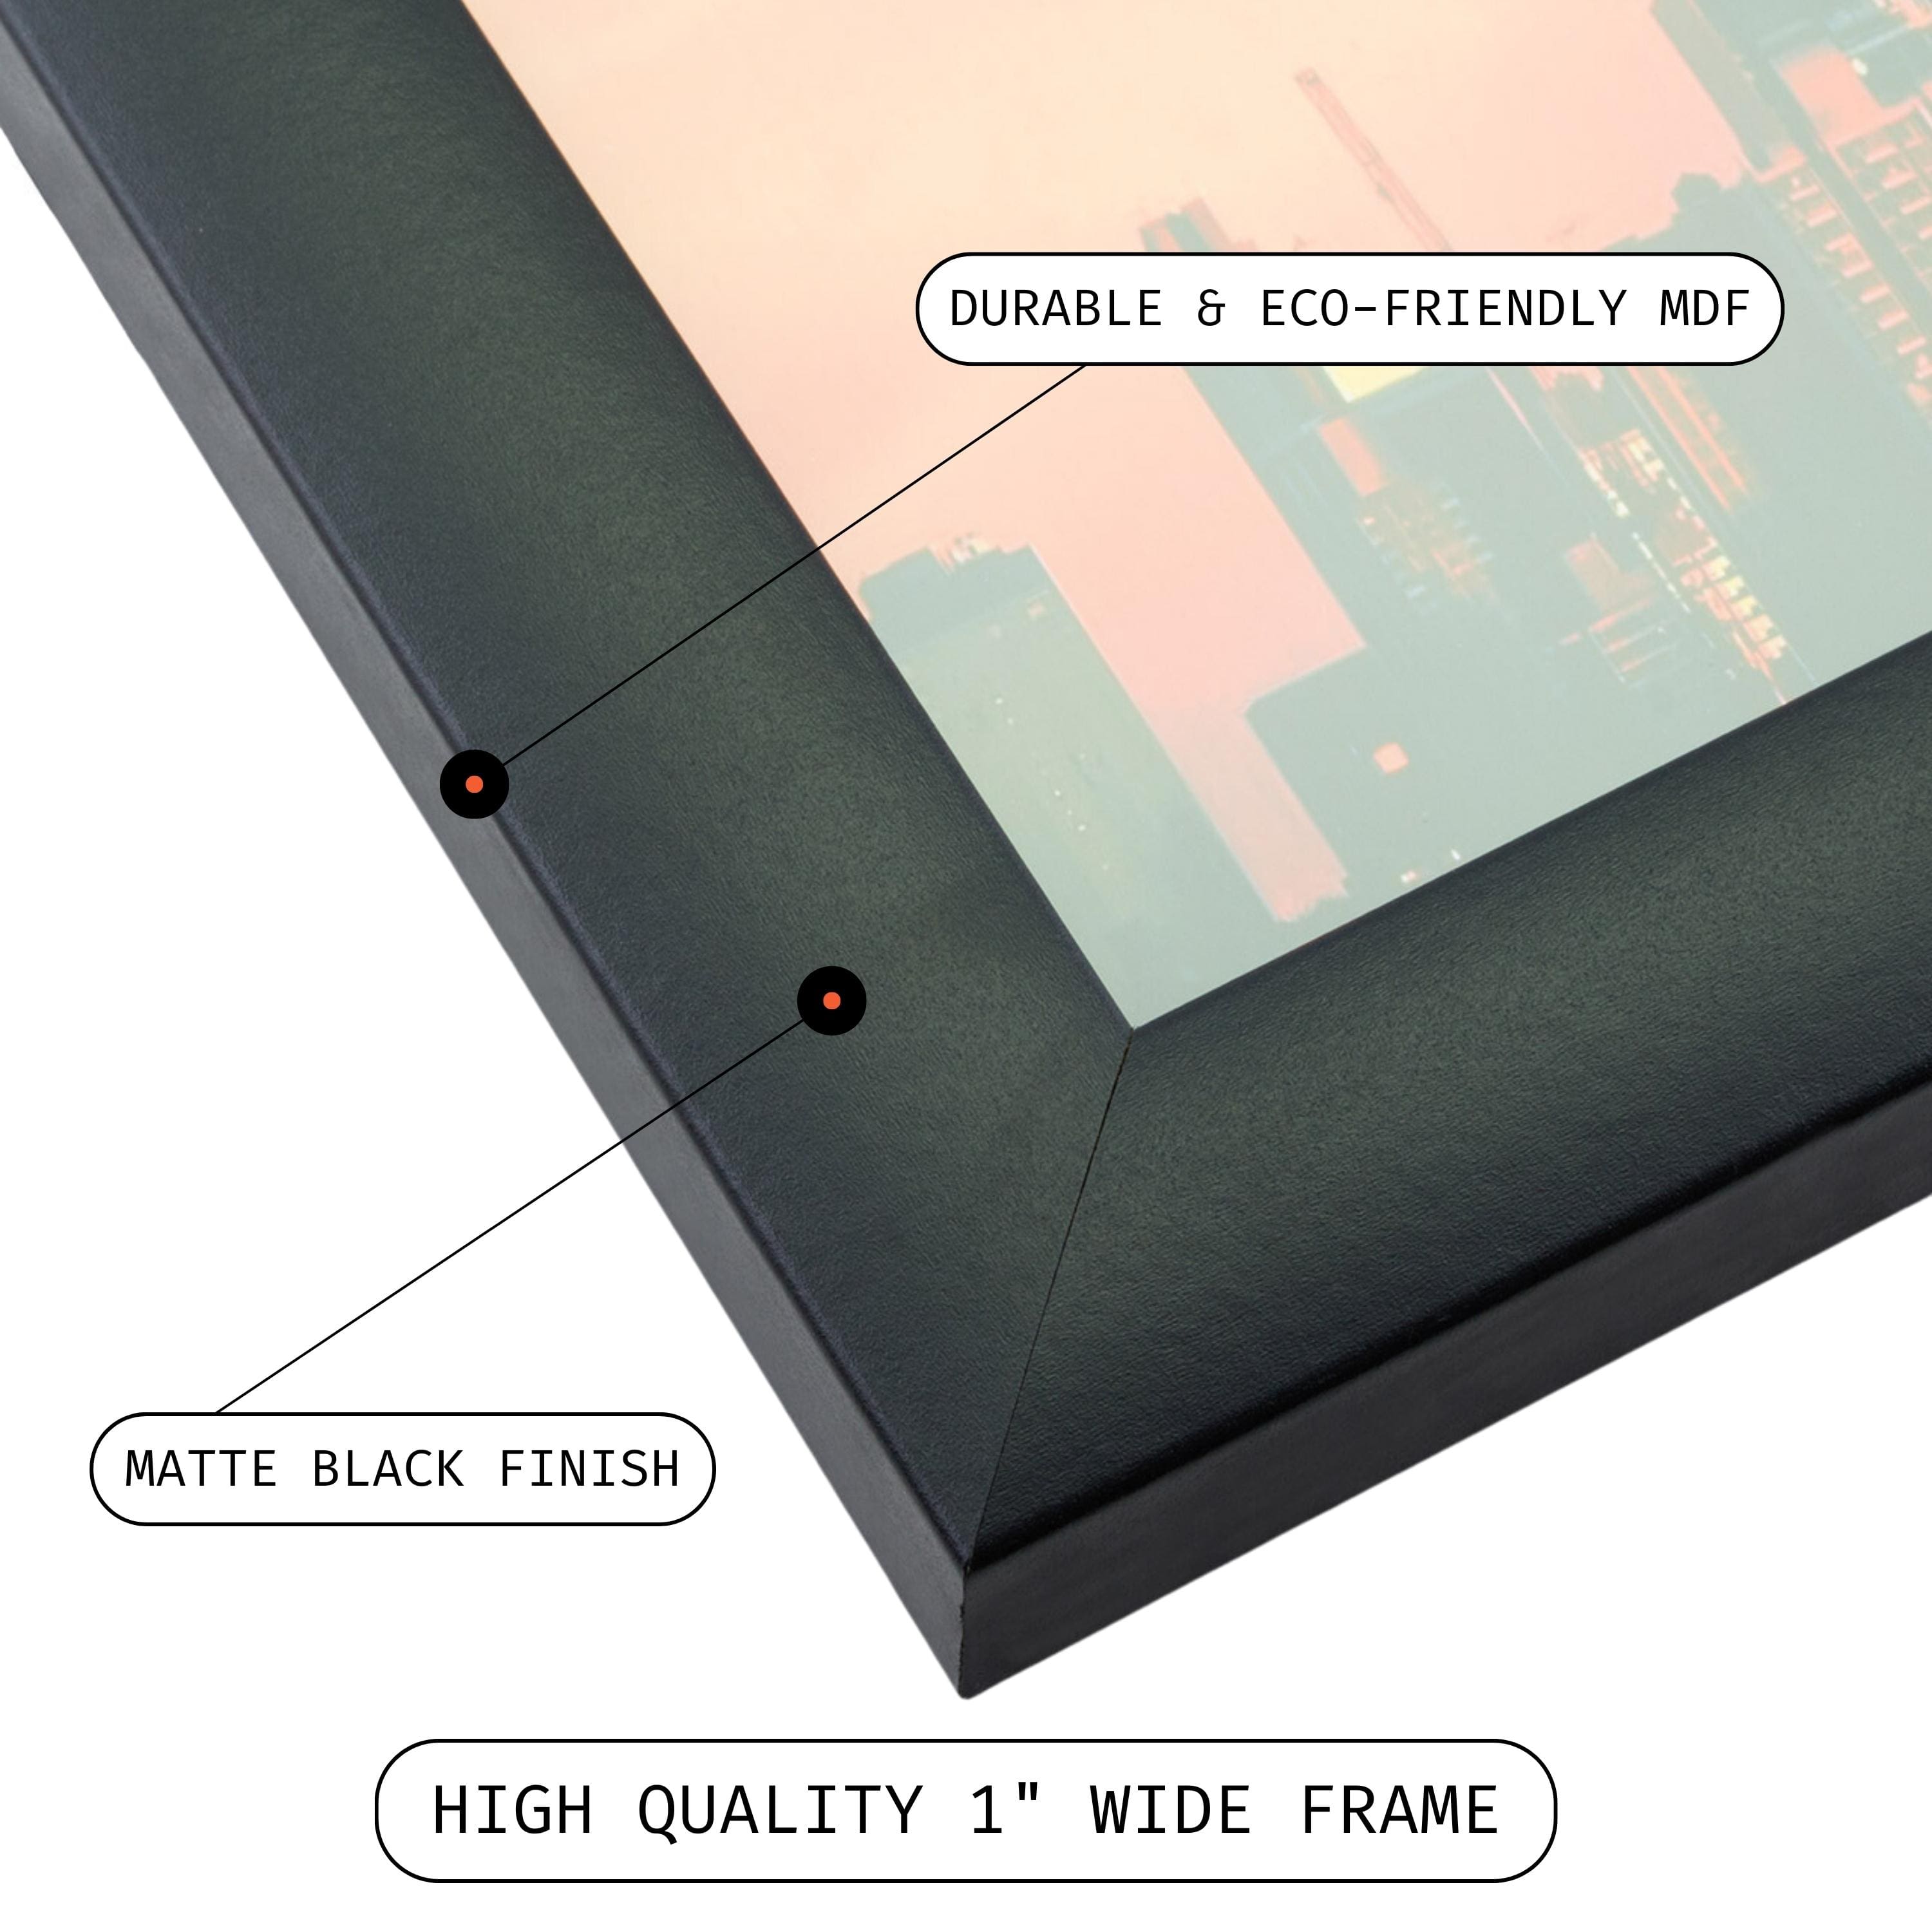 Craig Frames Contemporary Gallery Black Picture Frame